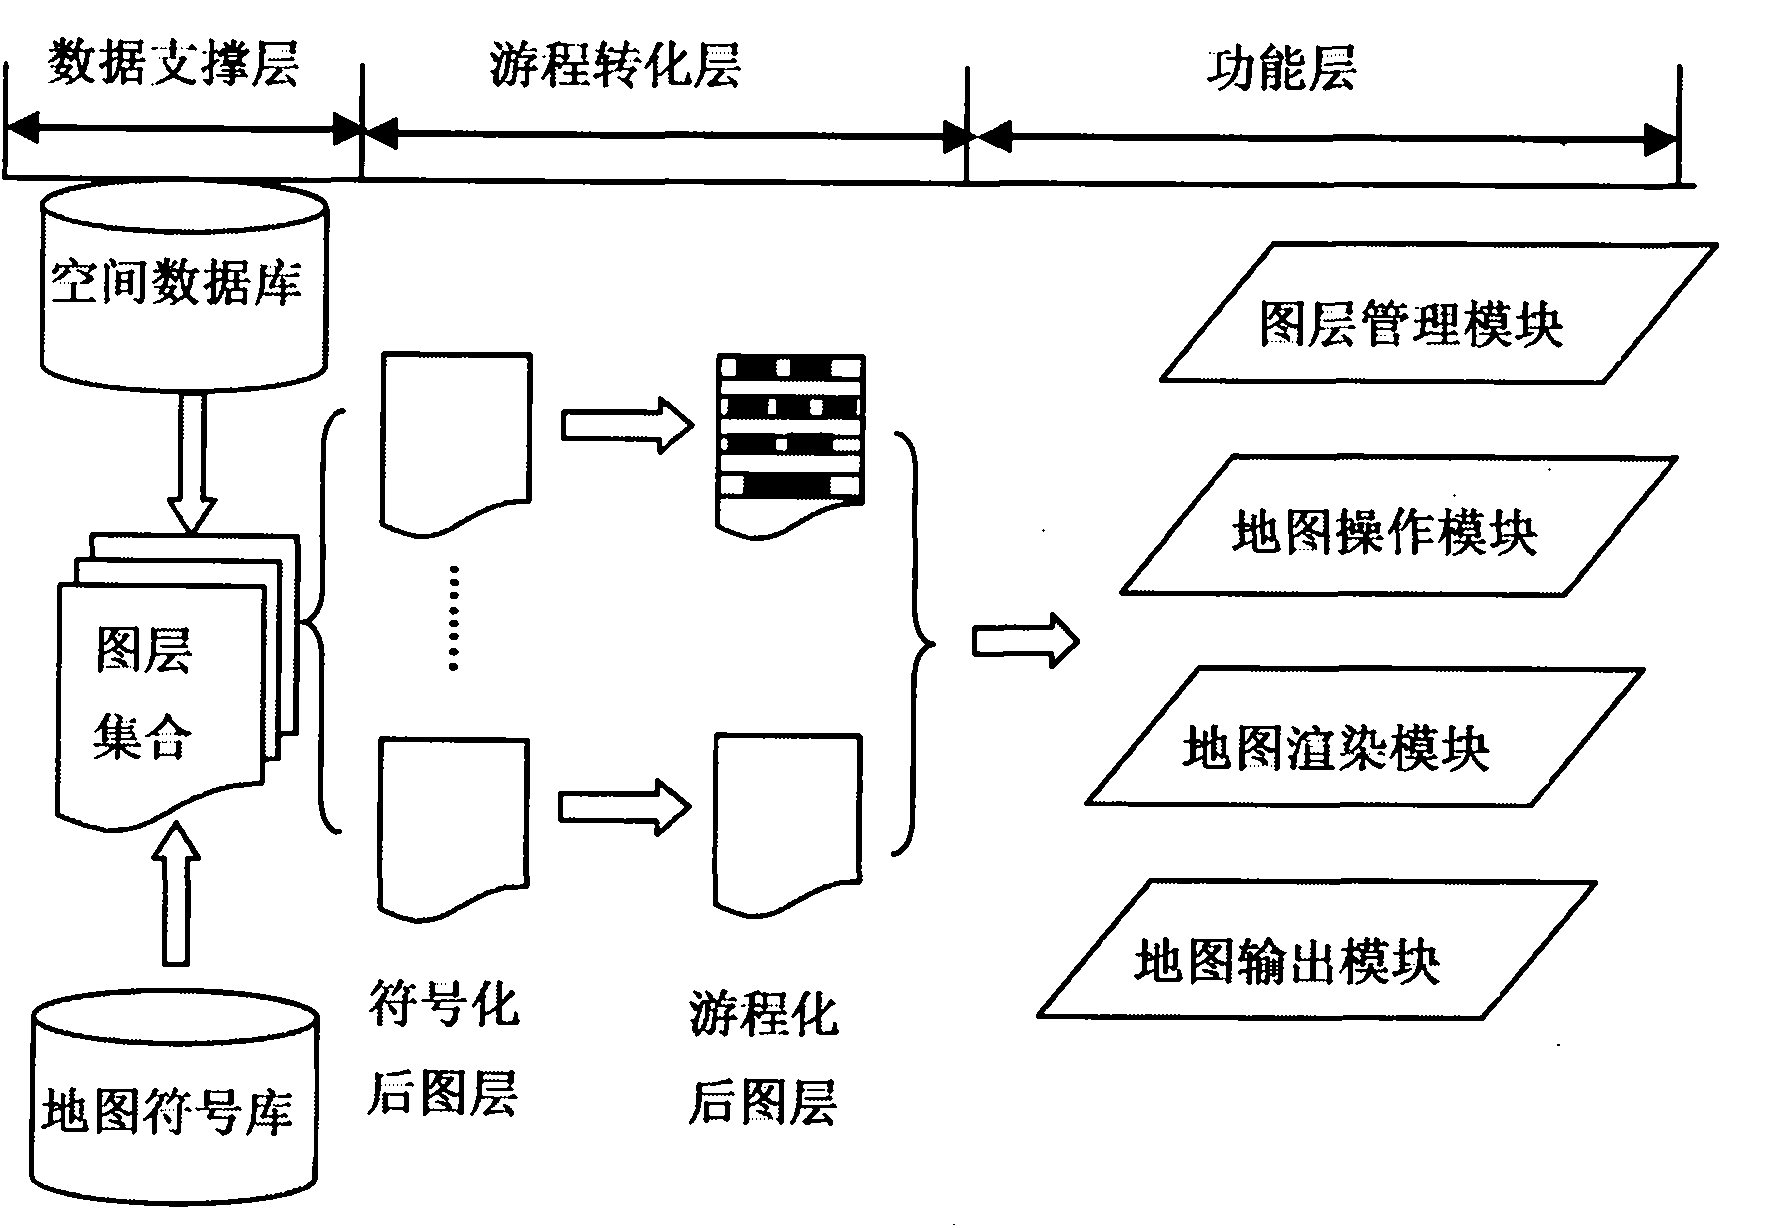 Run expression and operation-based map drawing method